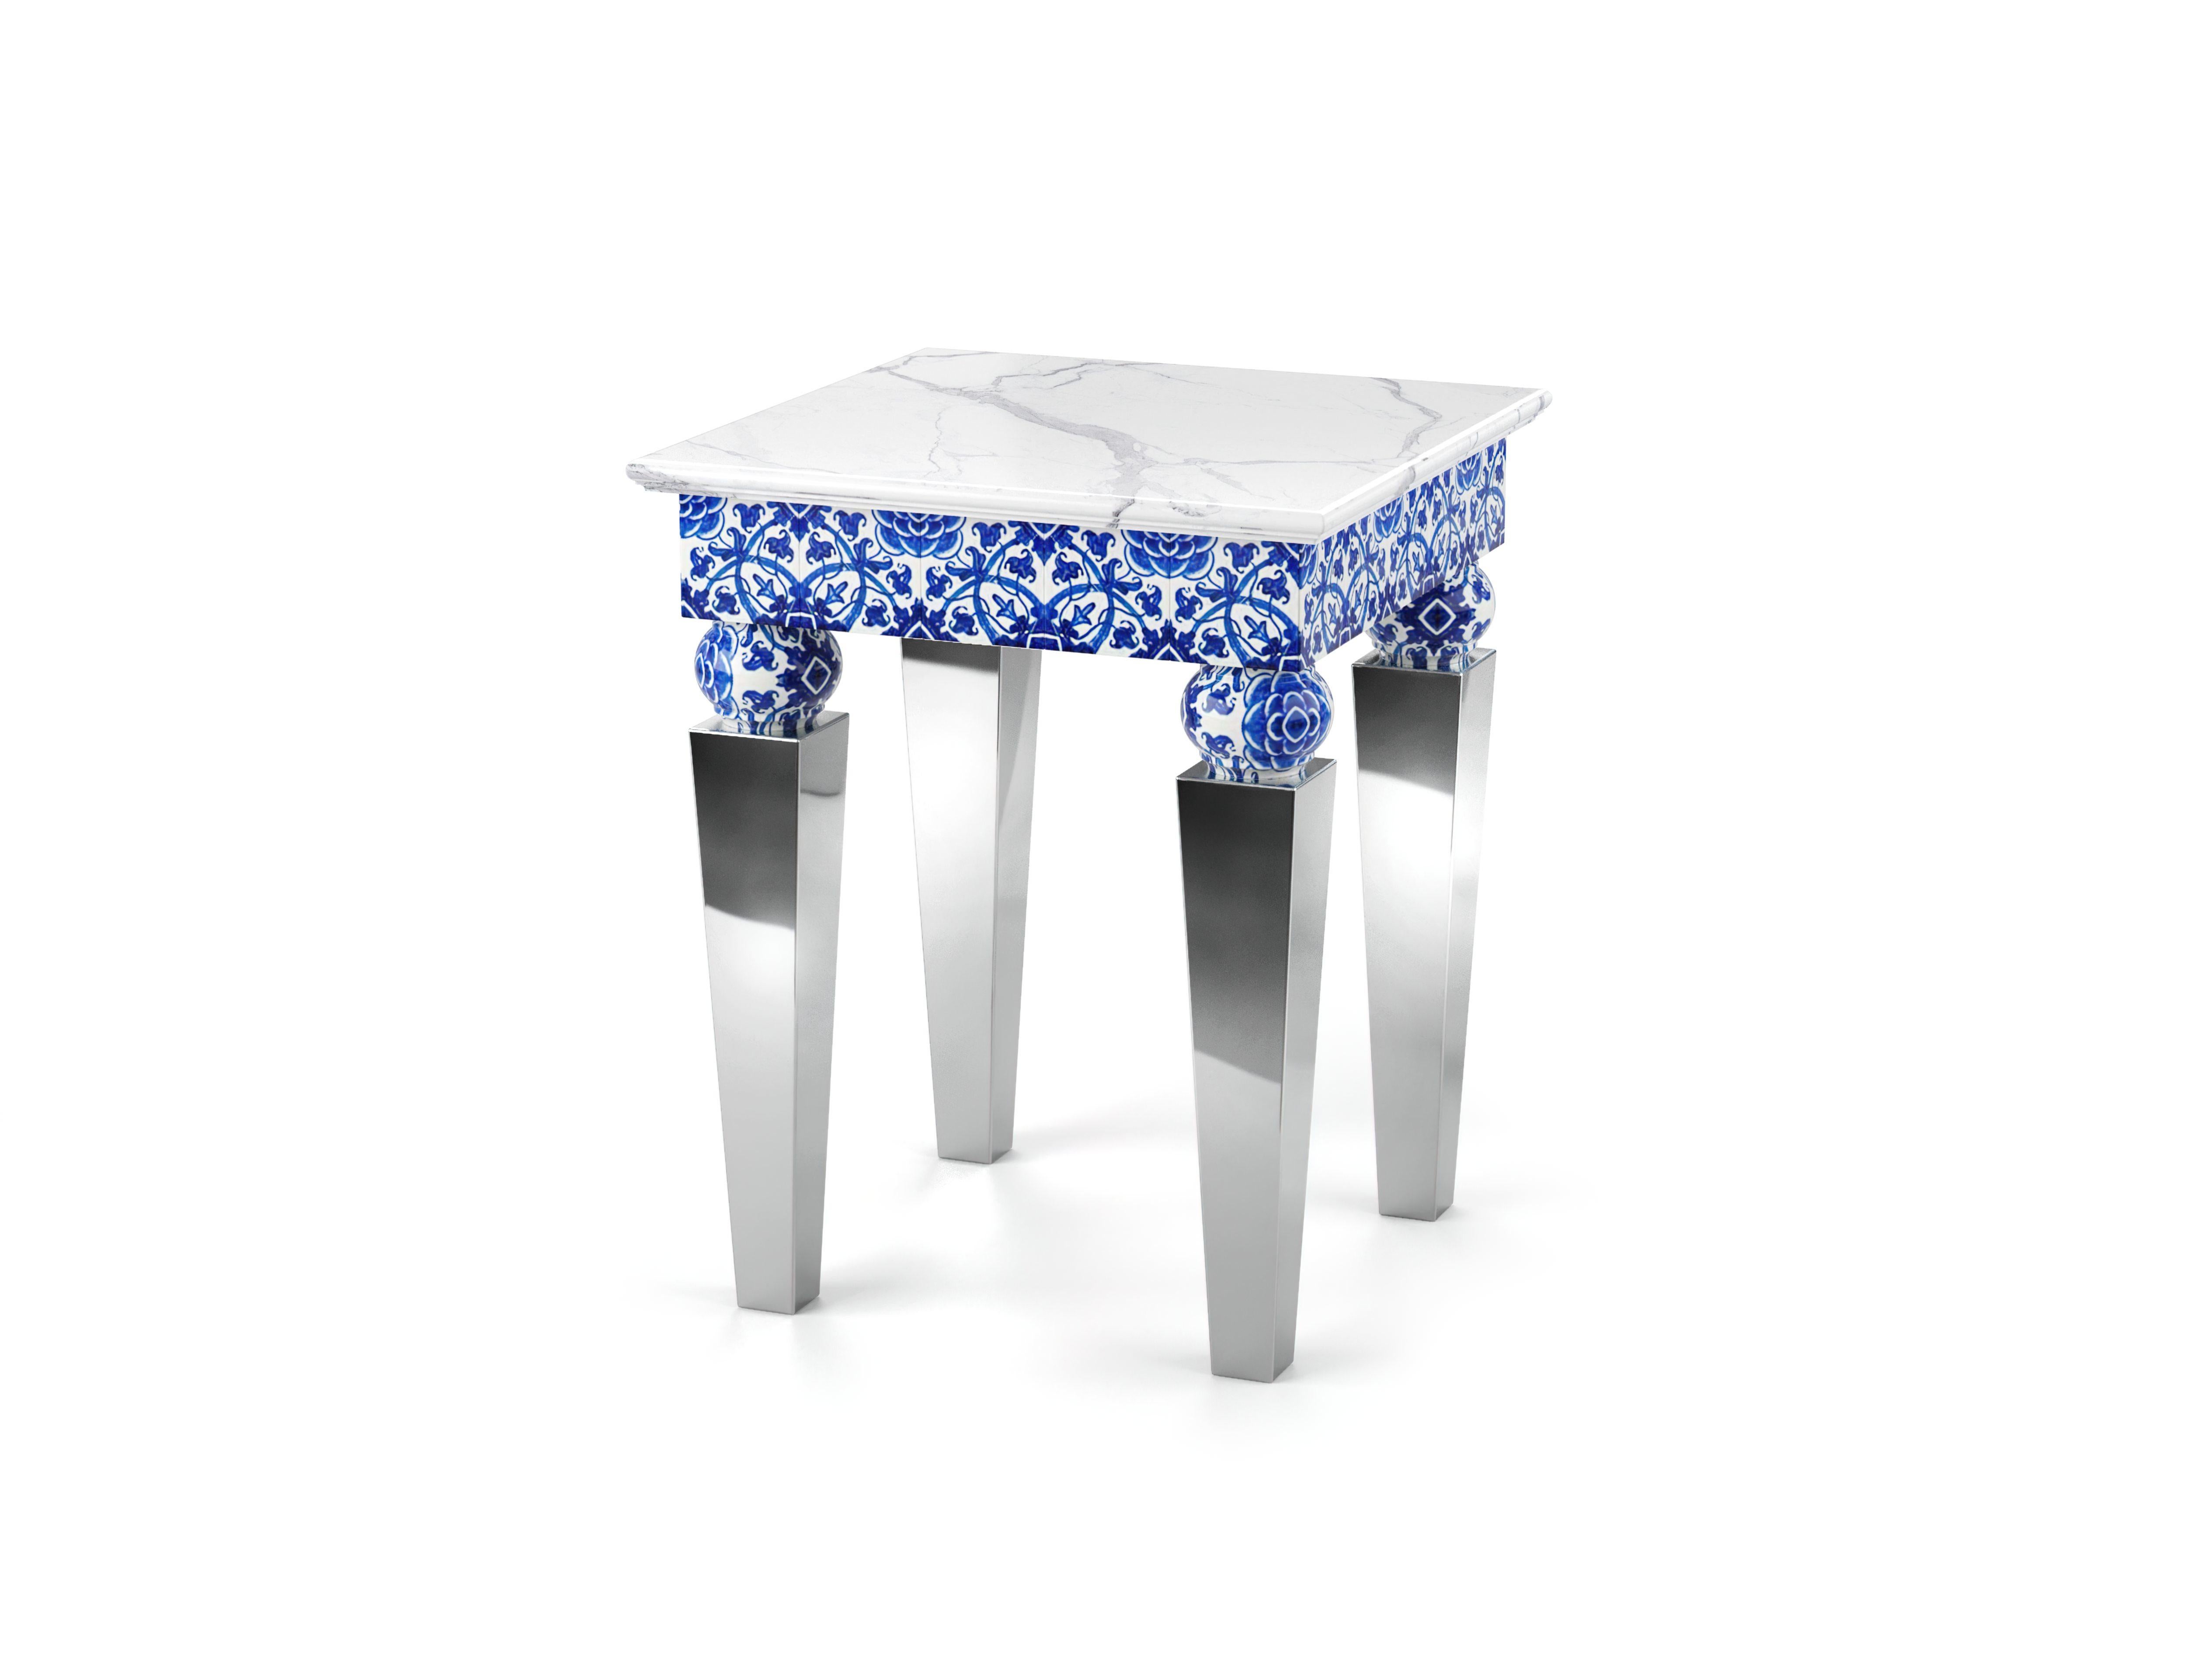 Ceramic Two Side Tables, White Marble, Mirror Steel, Blue Majolica Tiles, Also Outdoor For Sale